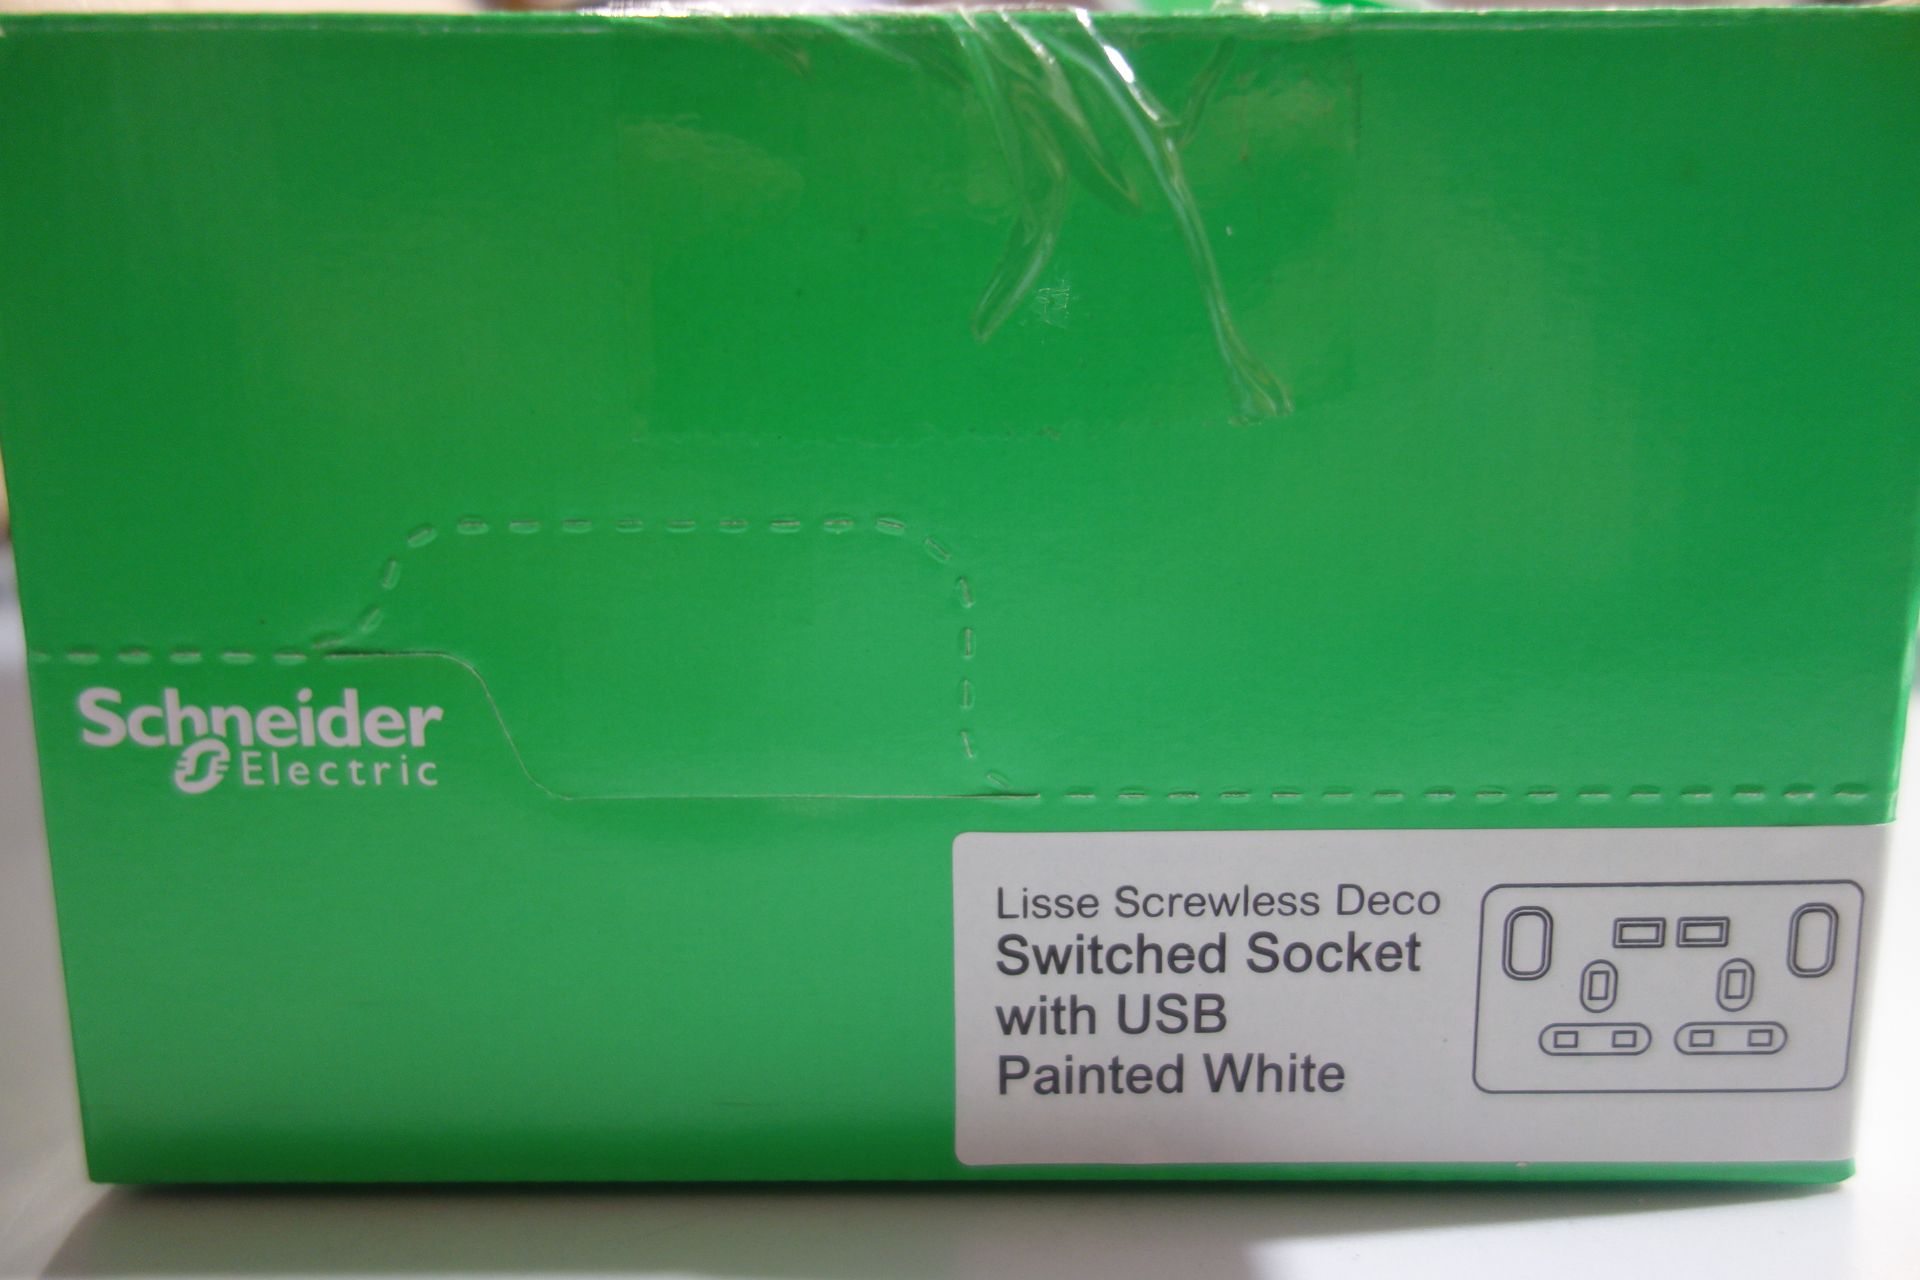 12 x Schneider GGBL30202USBAWPWS 2 GANG 13a SP Switched USB Sockets Screwless White Painted Finish